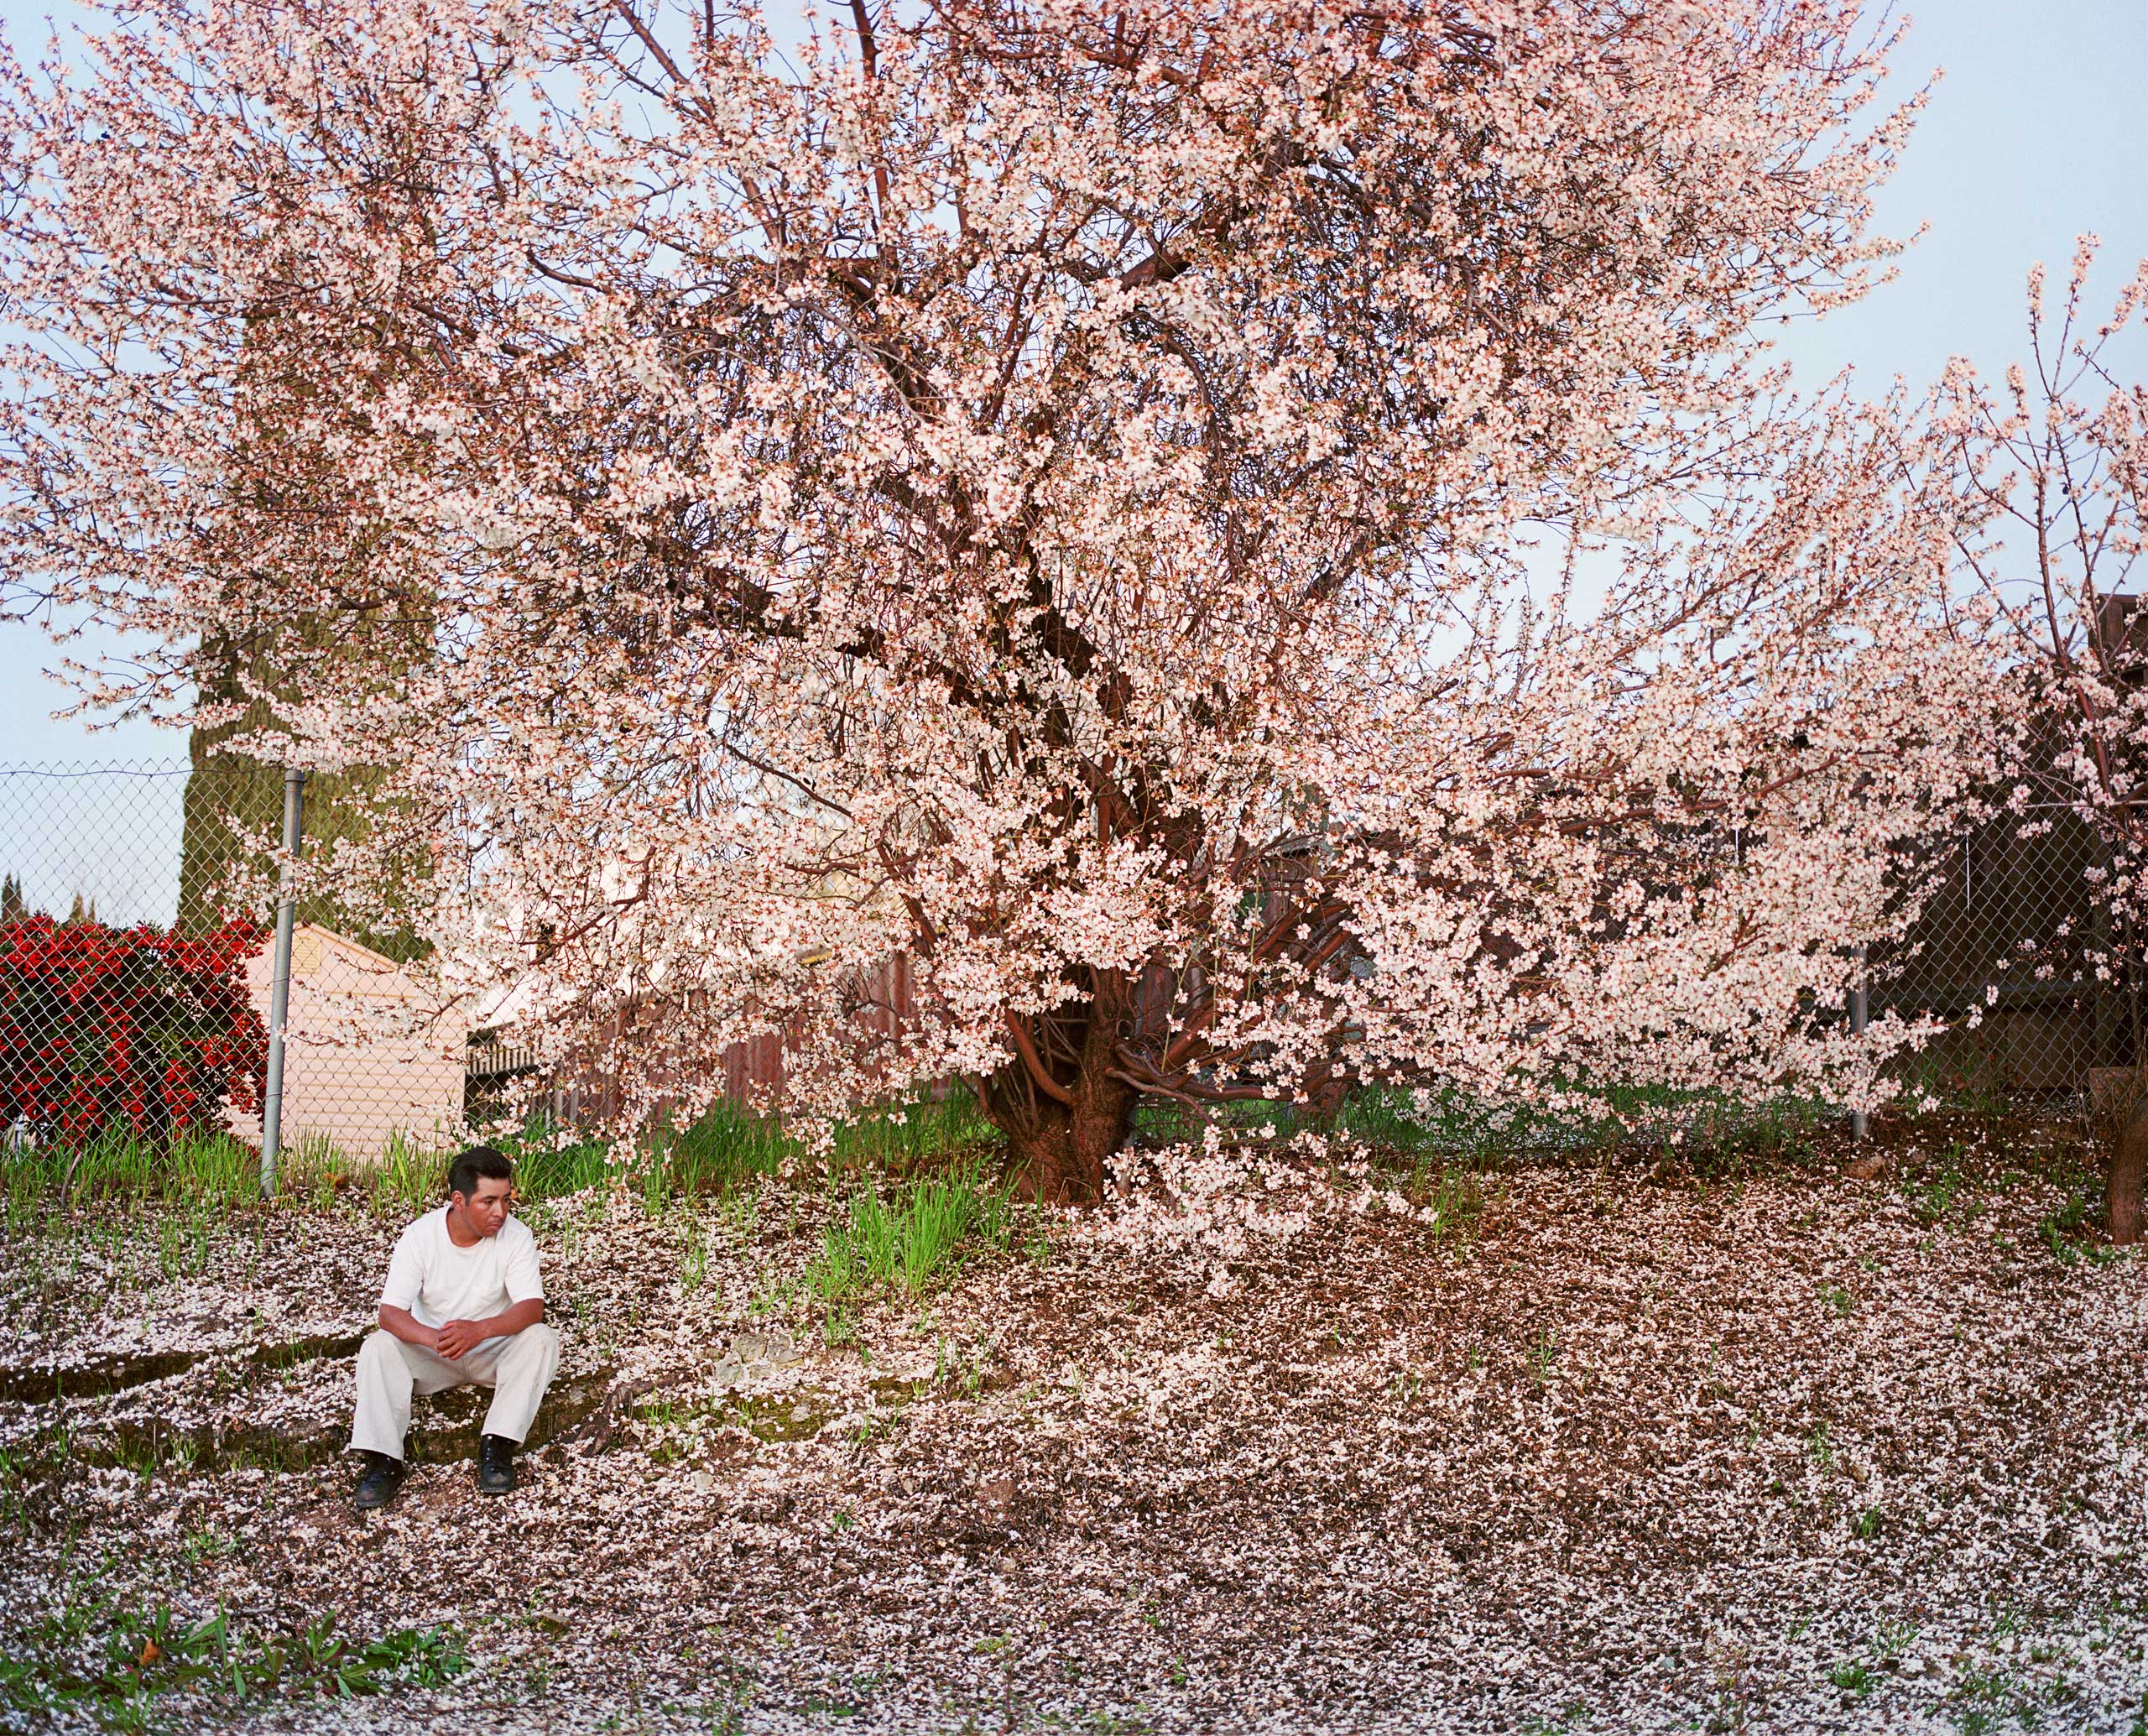 Antioch Creek, 2008, from the series Homeland